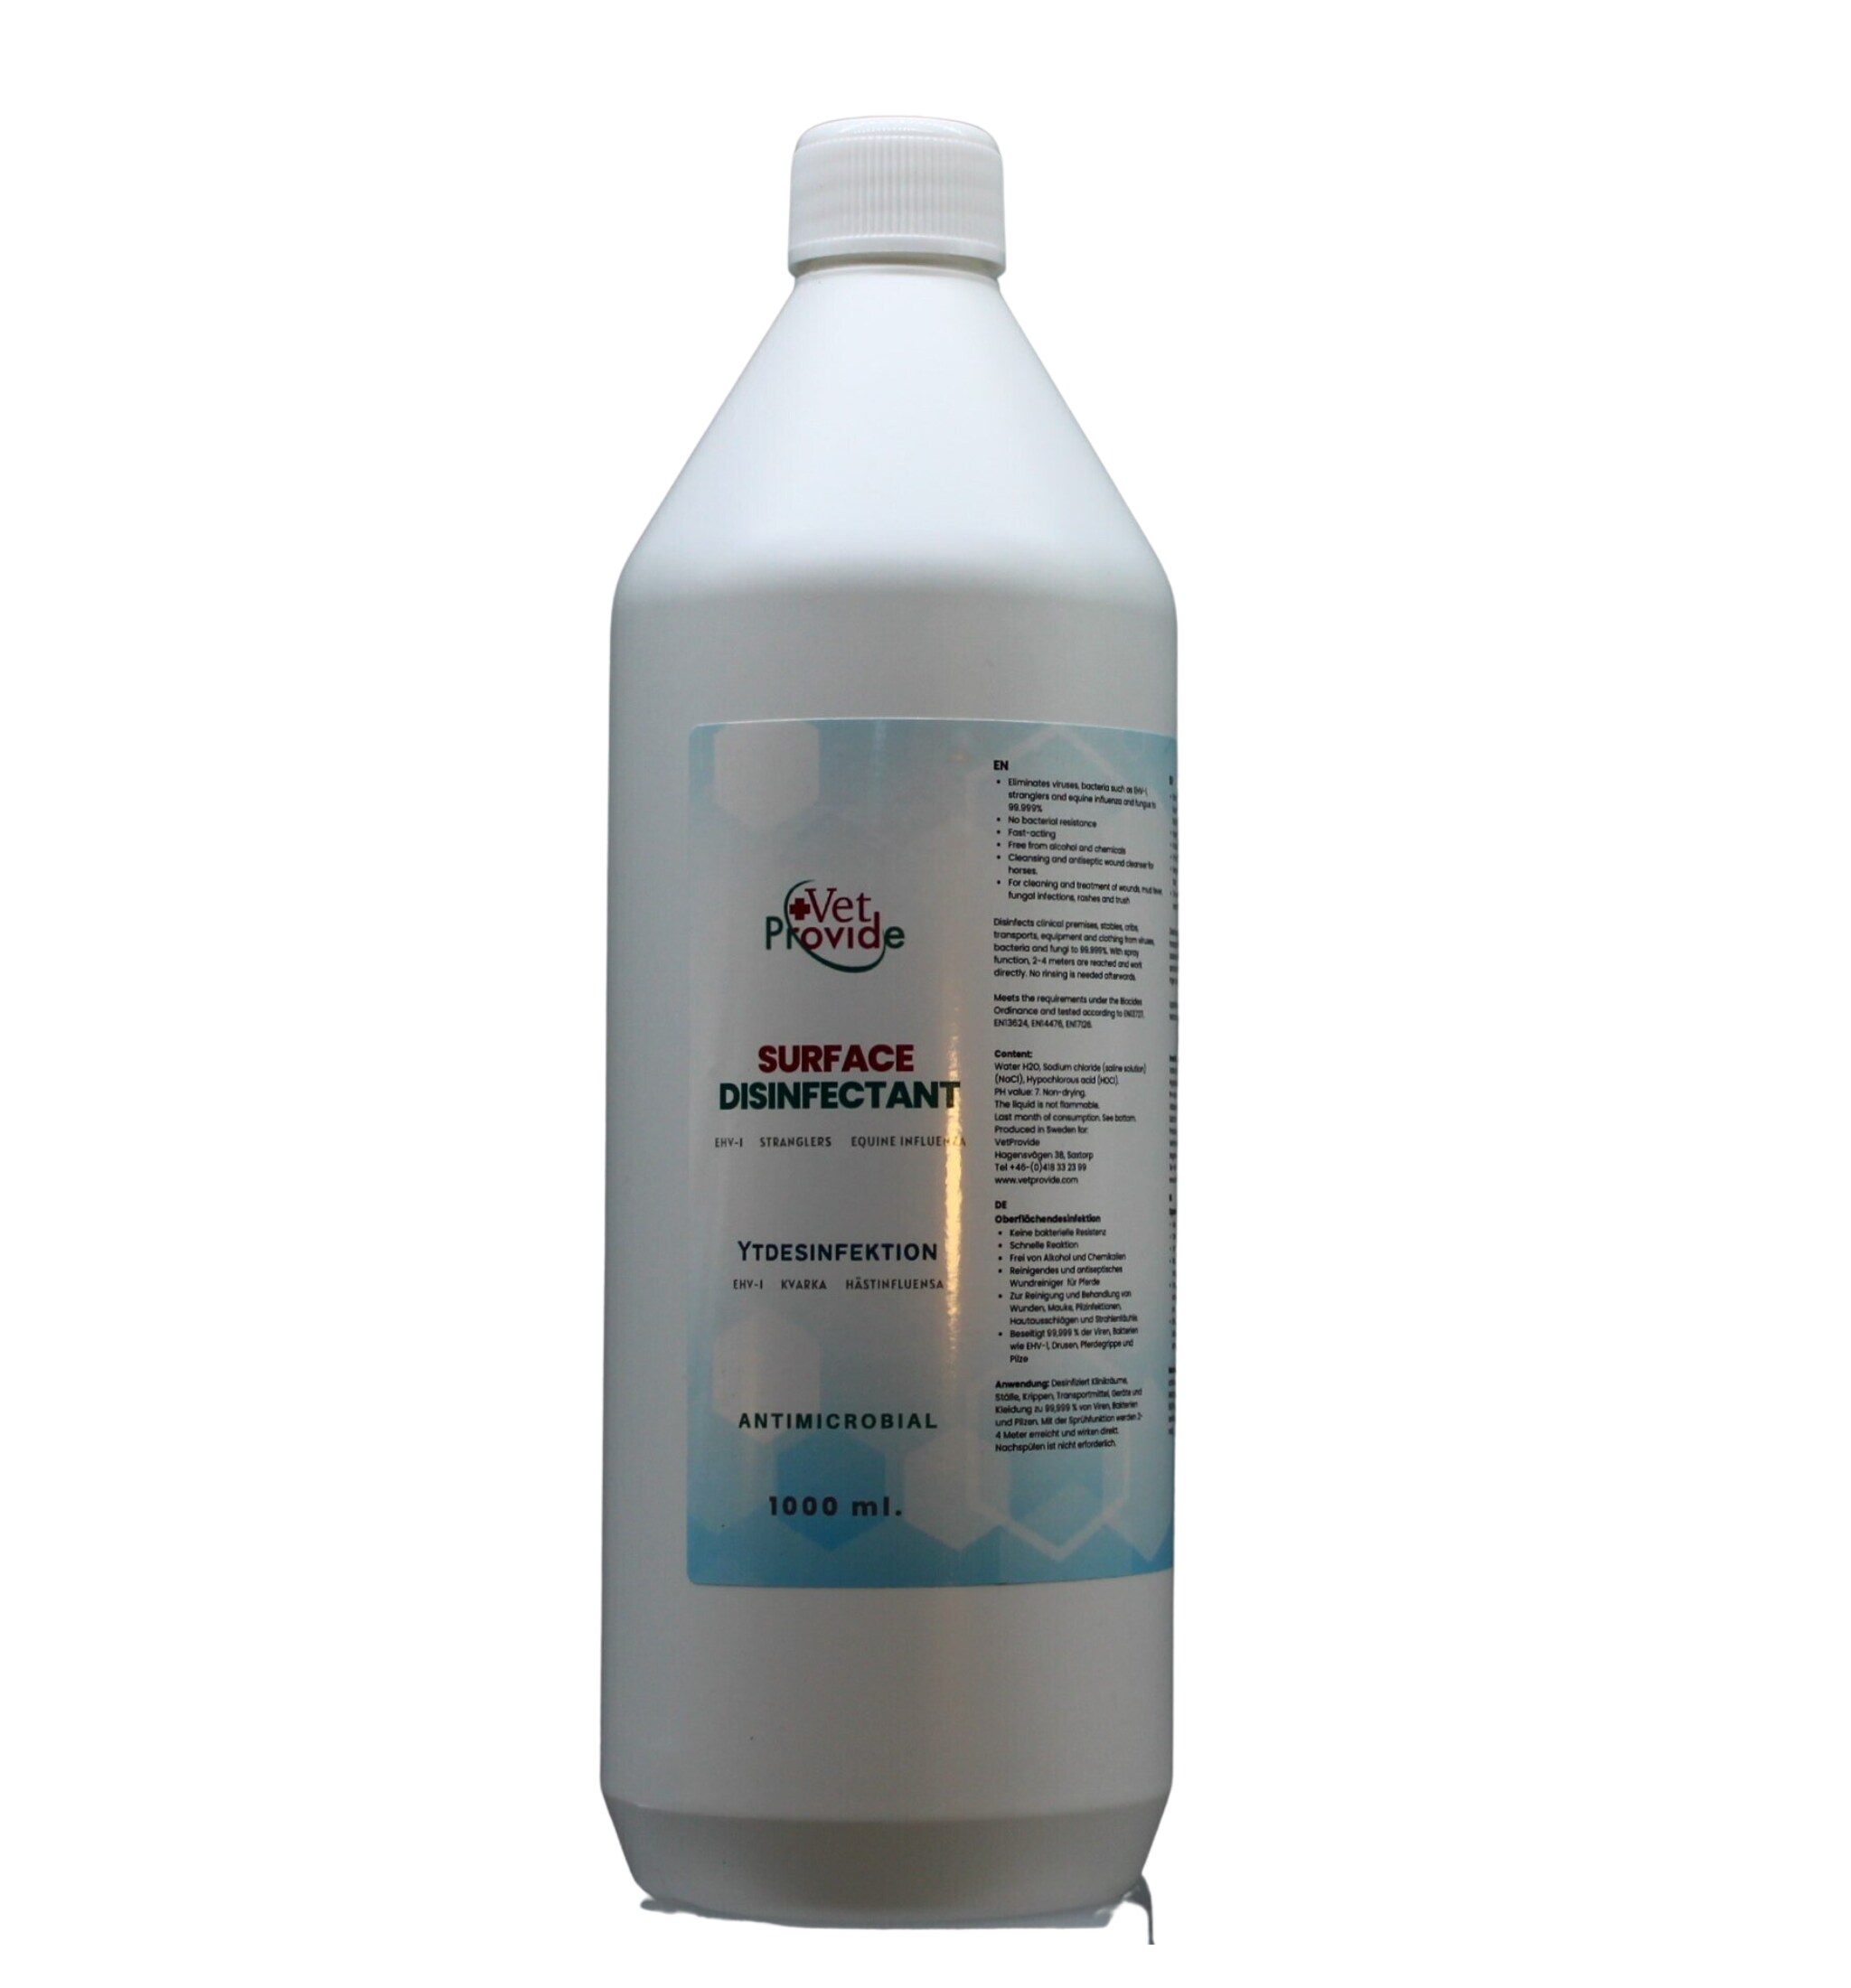 Surface disinfection - 1000 ml